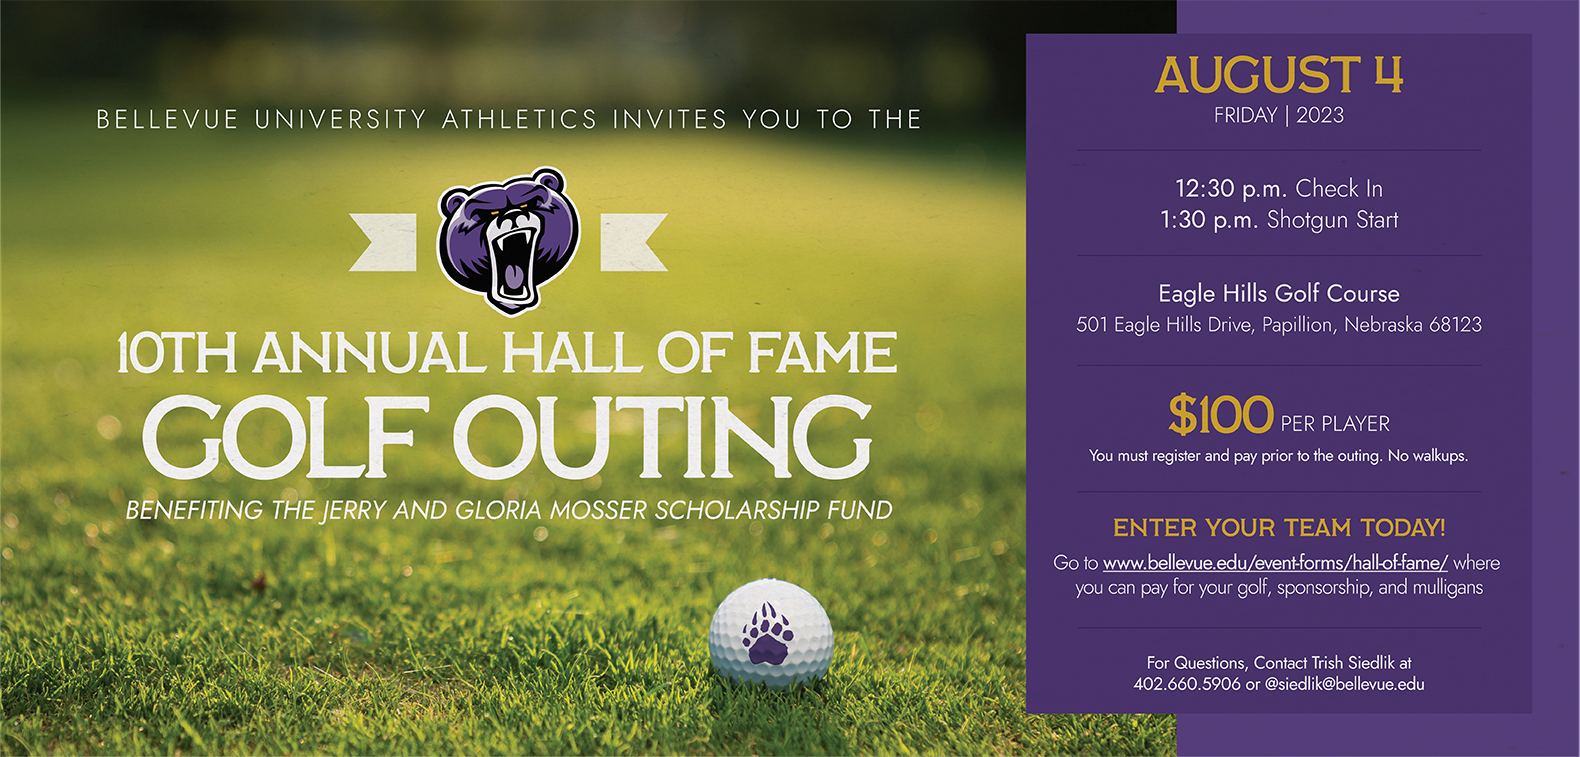 Hall of Fame Golf Outing set for August 4